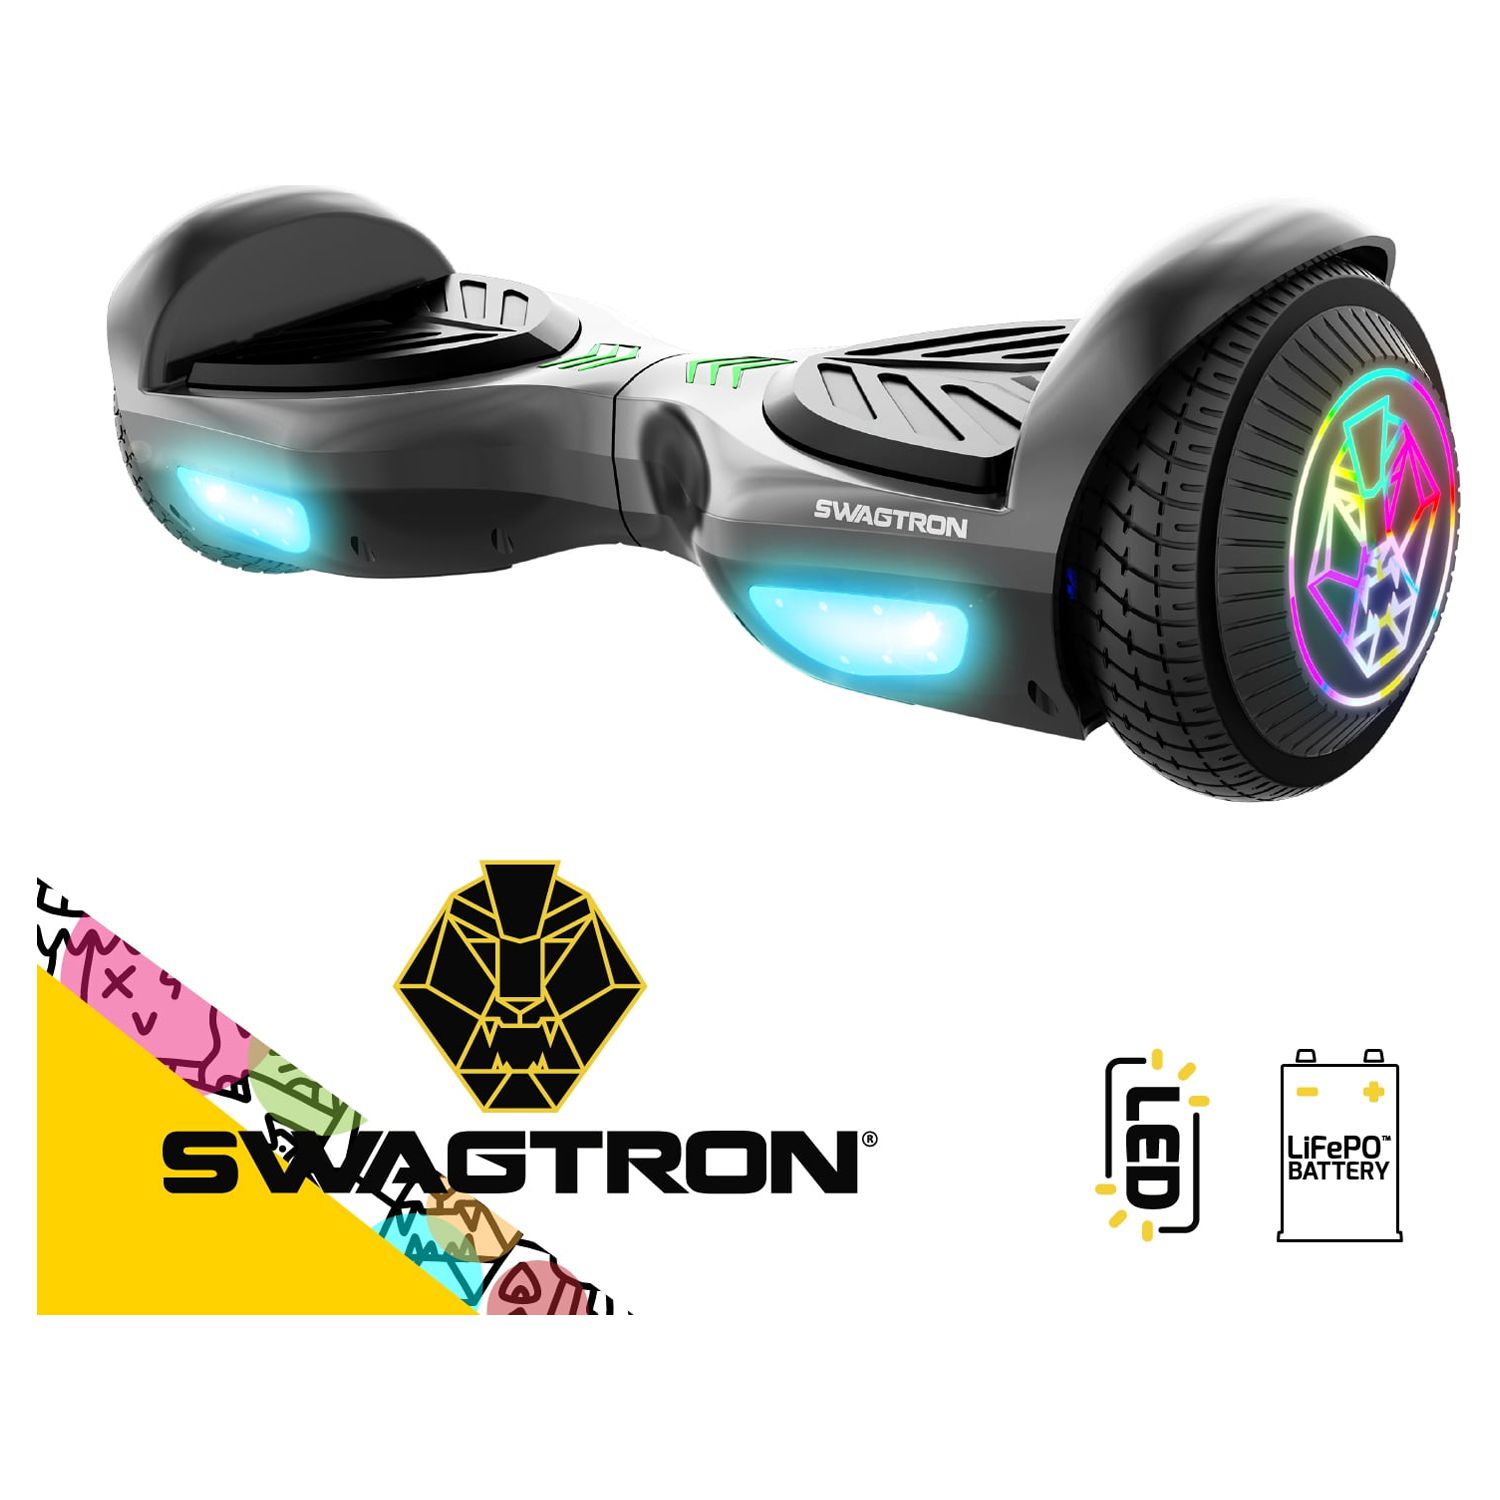 Swagtron Swag BOARD EVO V2 Hoverboard with Light-Up Wheels & Balance Assist, Exclusive UL-Compliant Life Po™ Battery Tech - image 4 of 8